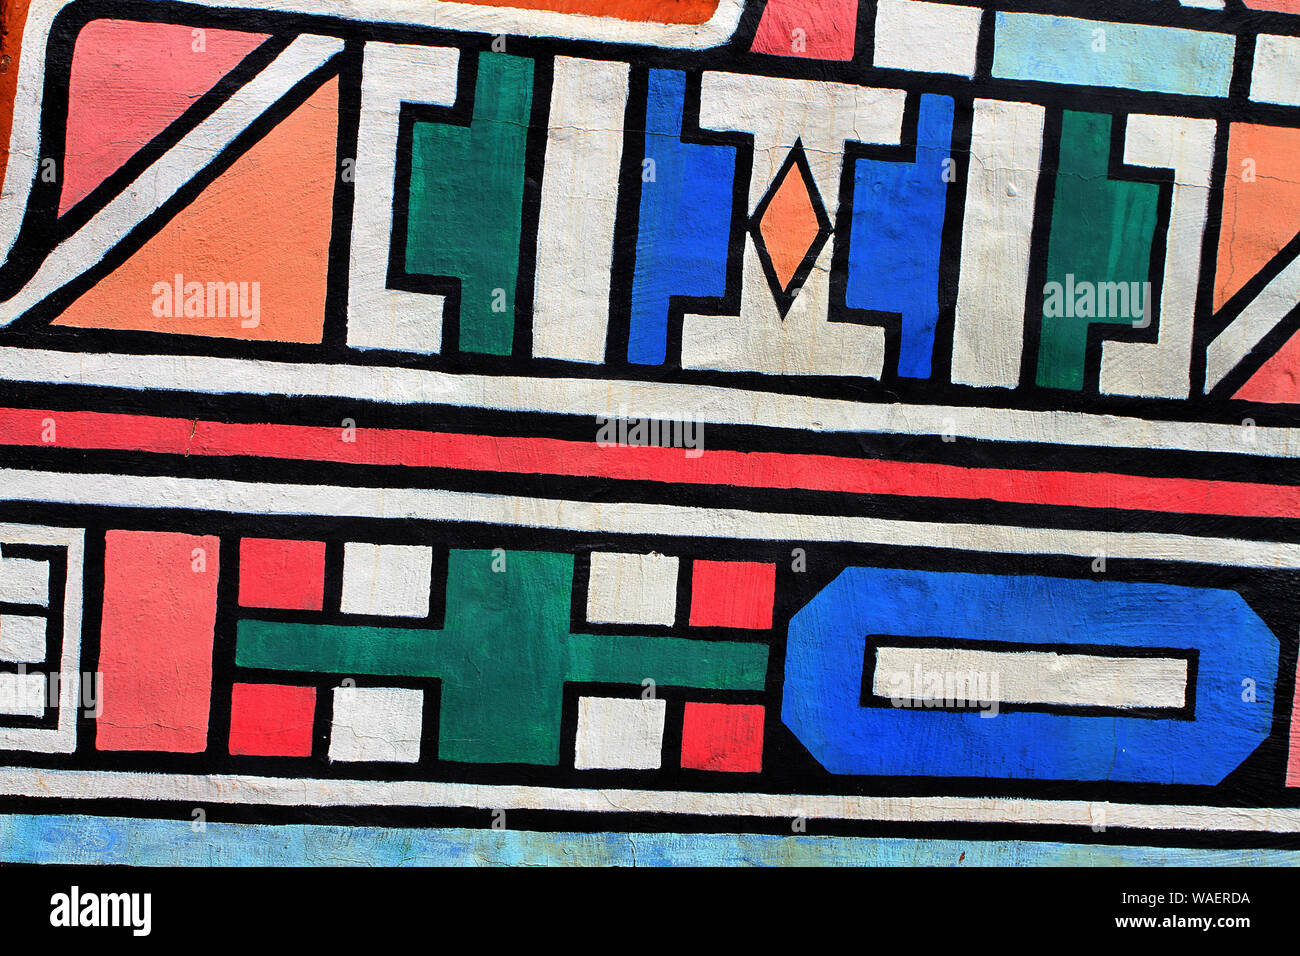 Traditional Ndebele painted walls at Lesedi Cultural Village, Cradle of Humankind, South Africa Stock Photo